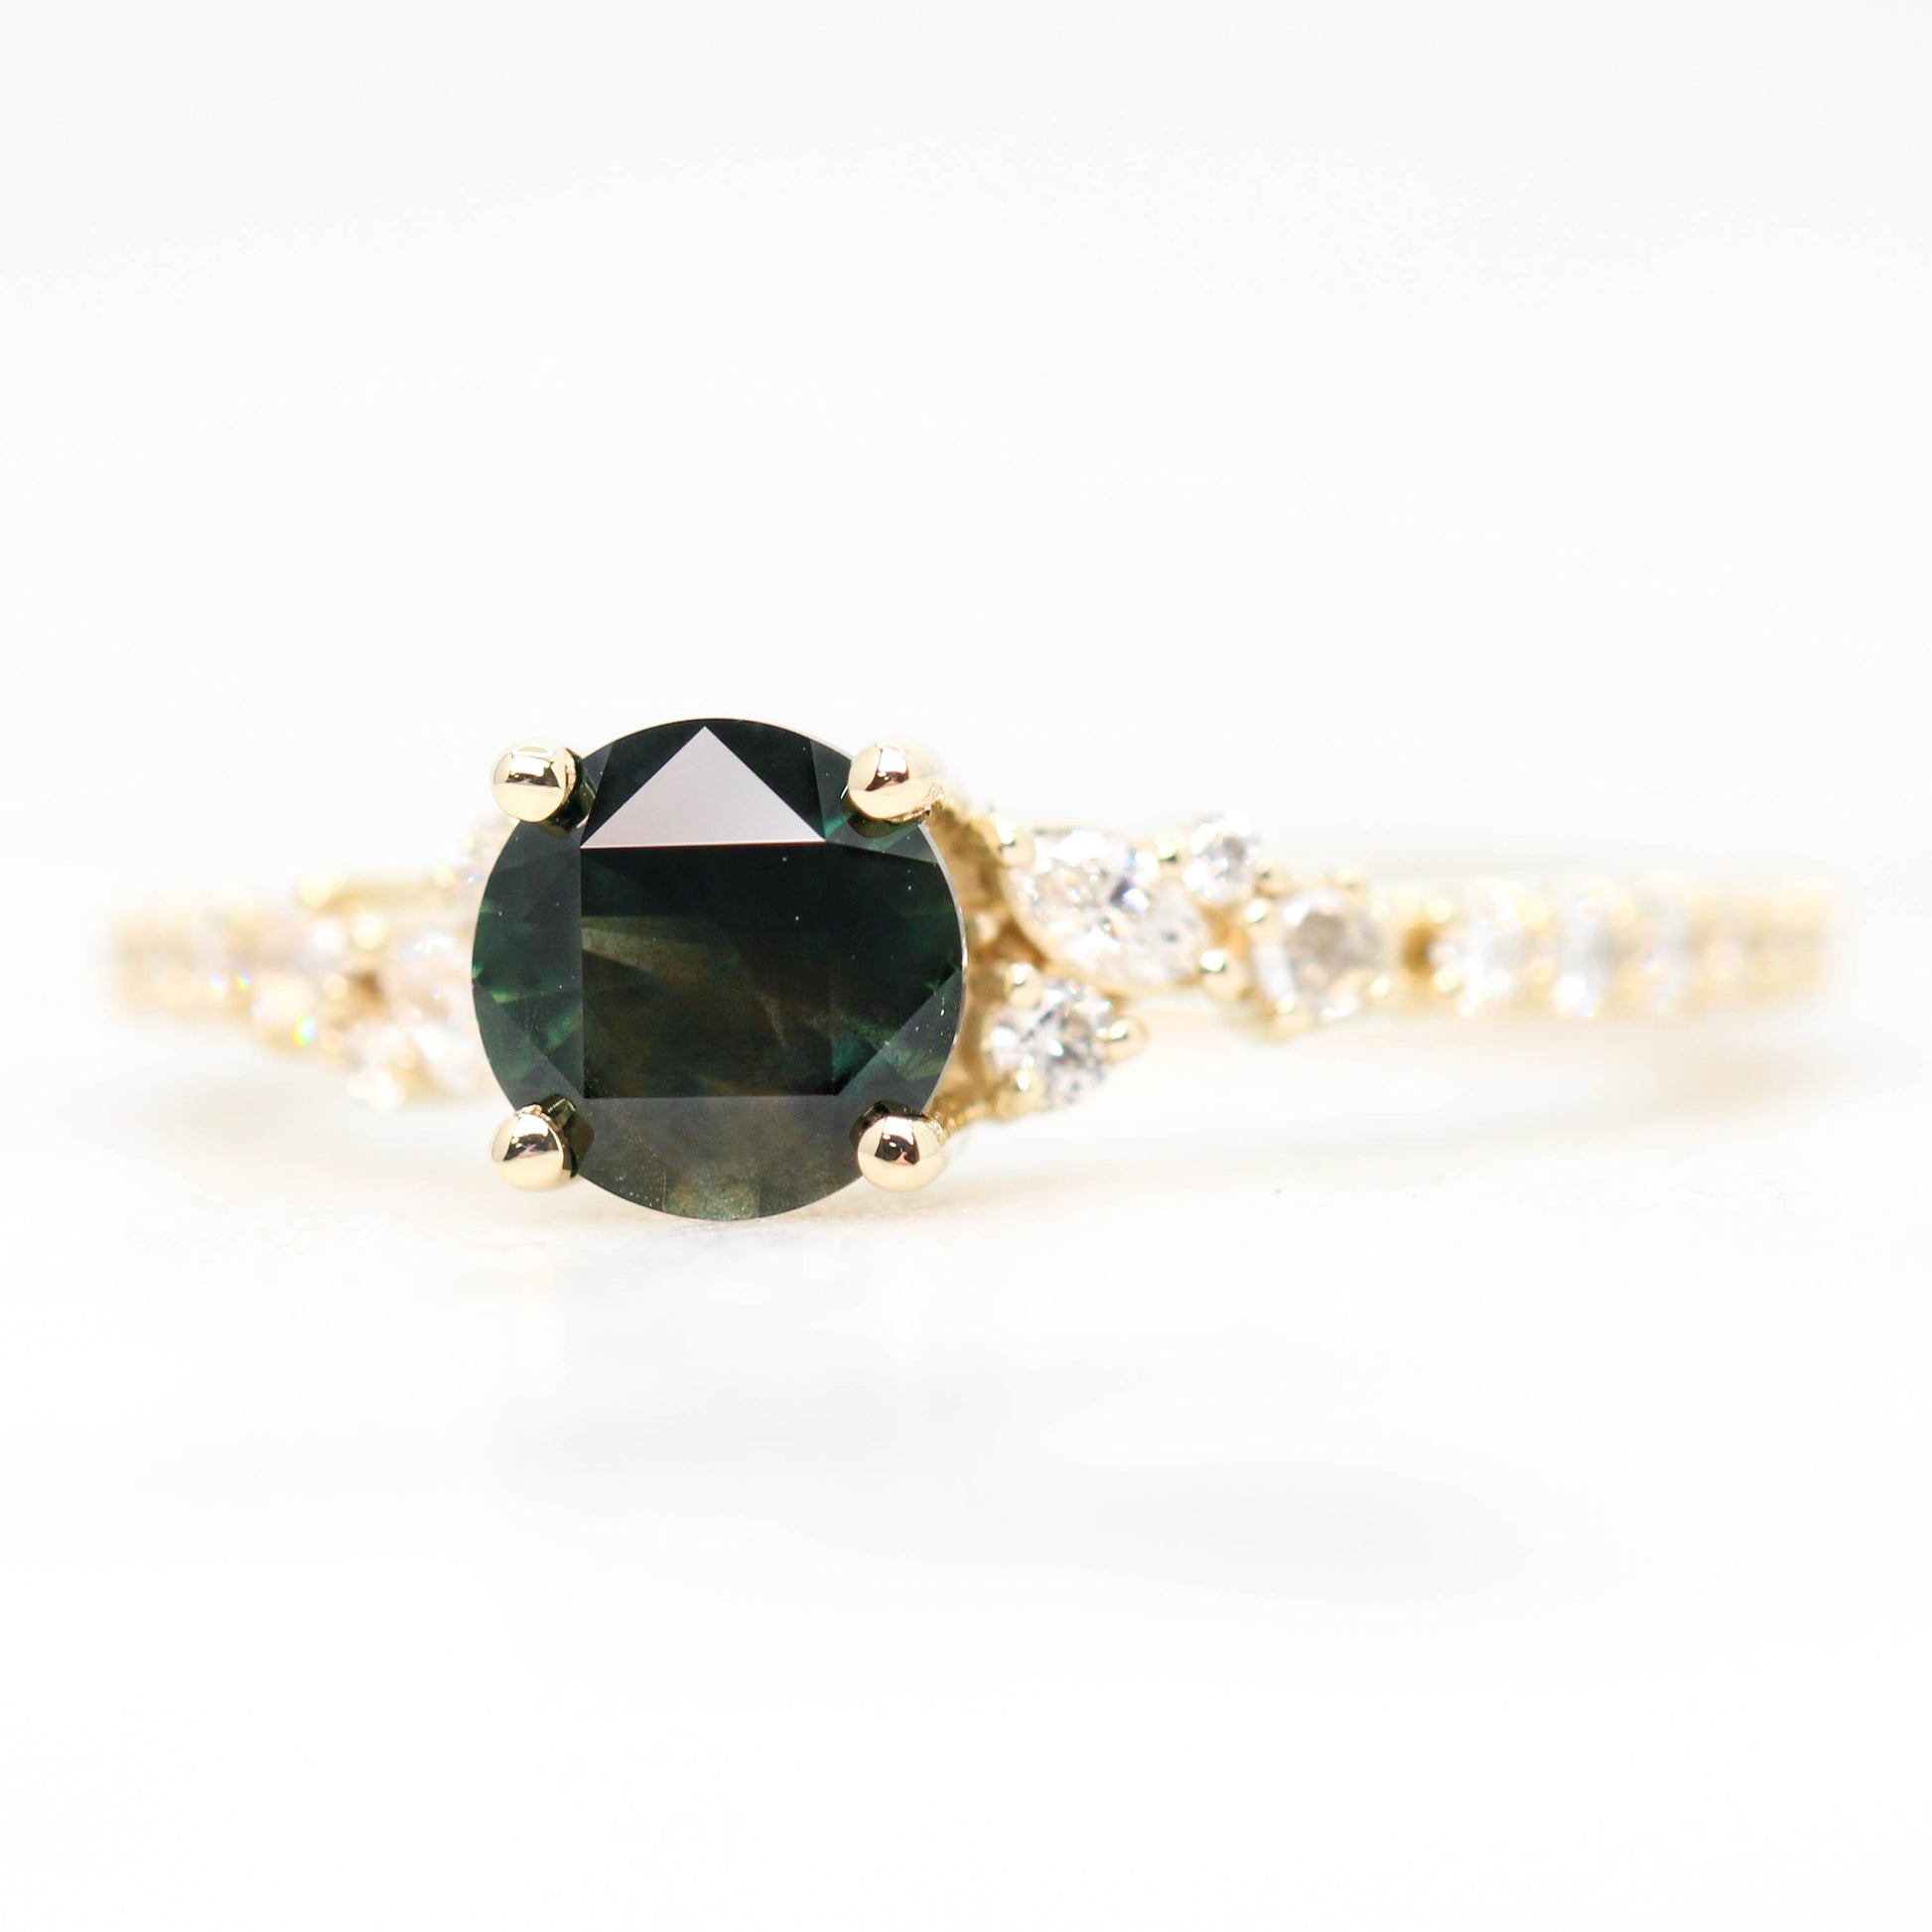 Elodie Ring with a 0.89 Carat Dark Green Unique Cut Sapphire and White Accent Diamonds in 14k Yellow Gold - Ready to Size and Ship - Midwinter Co. Alternative Bridal Rings and Modern Fine Jewelry